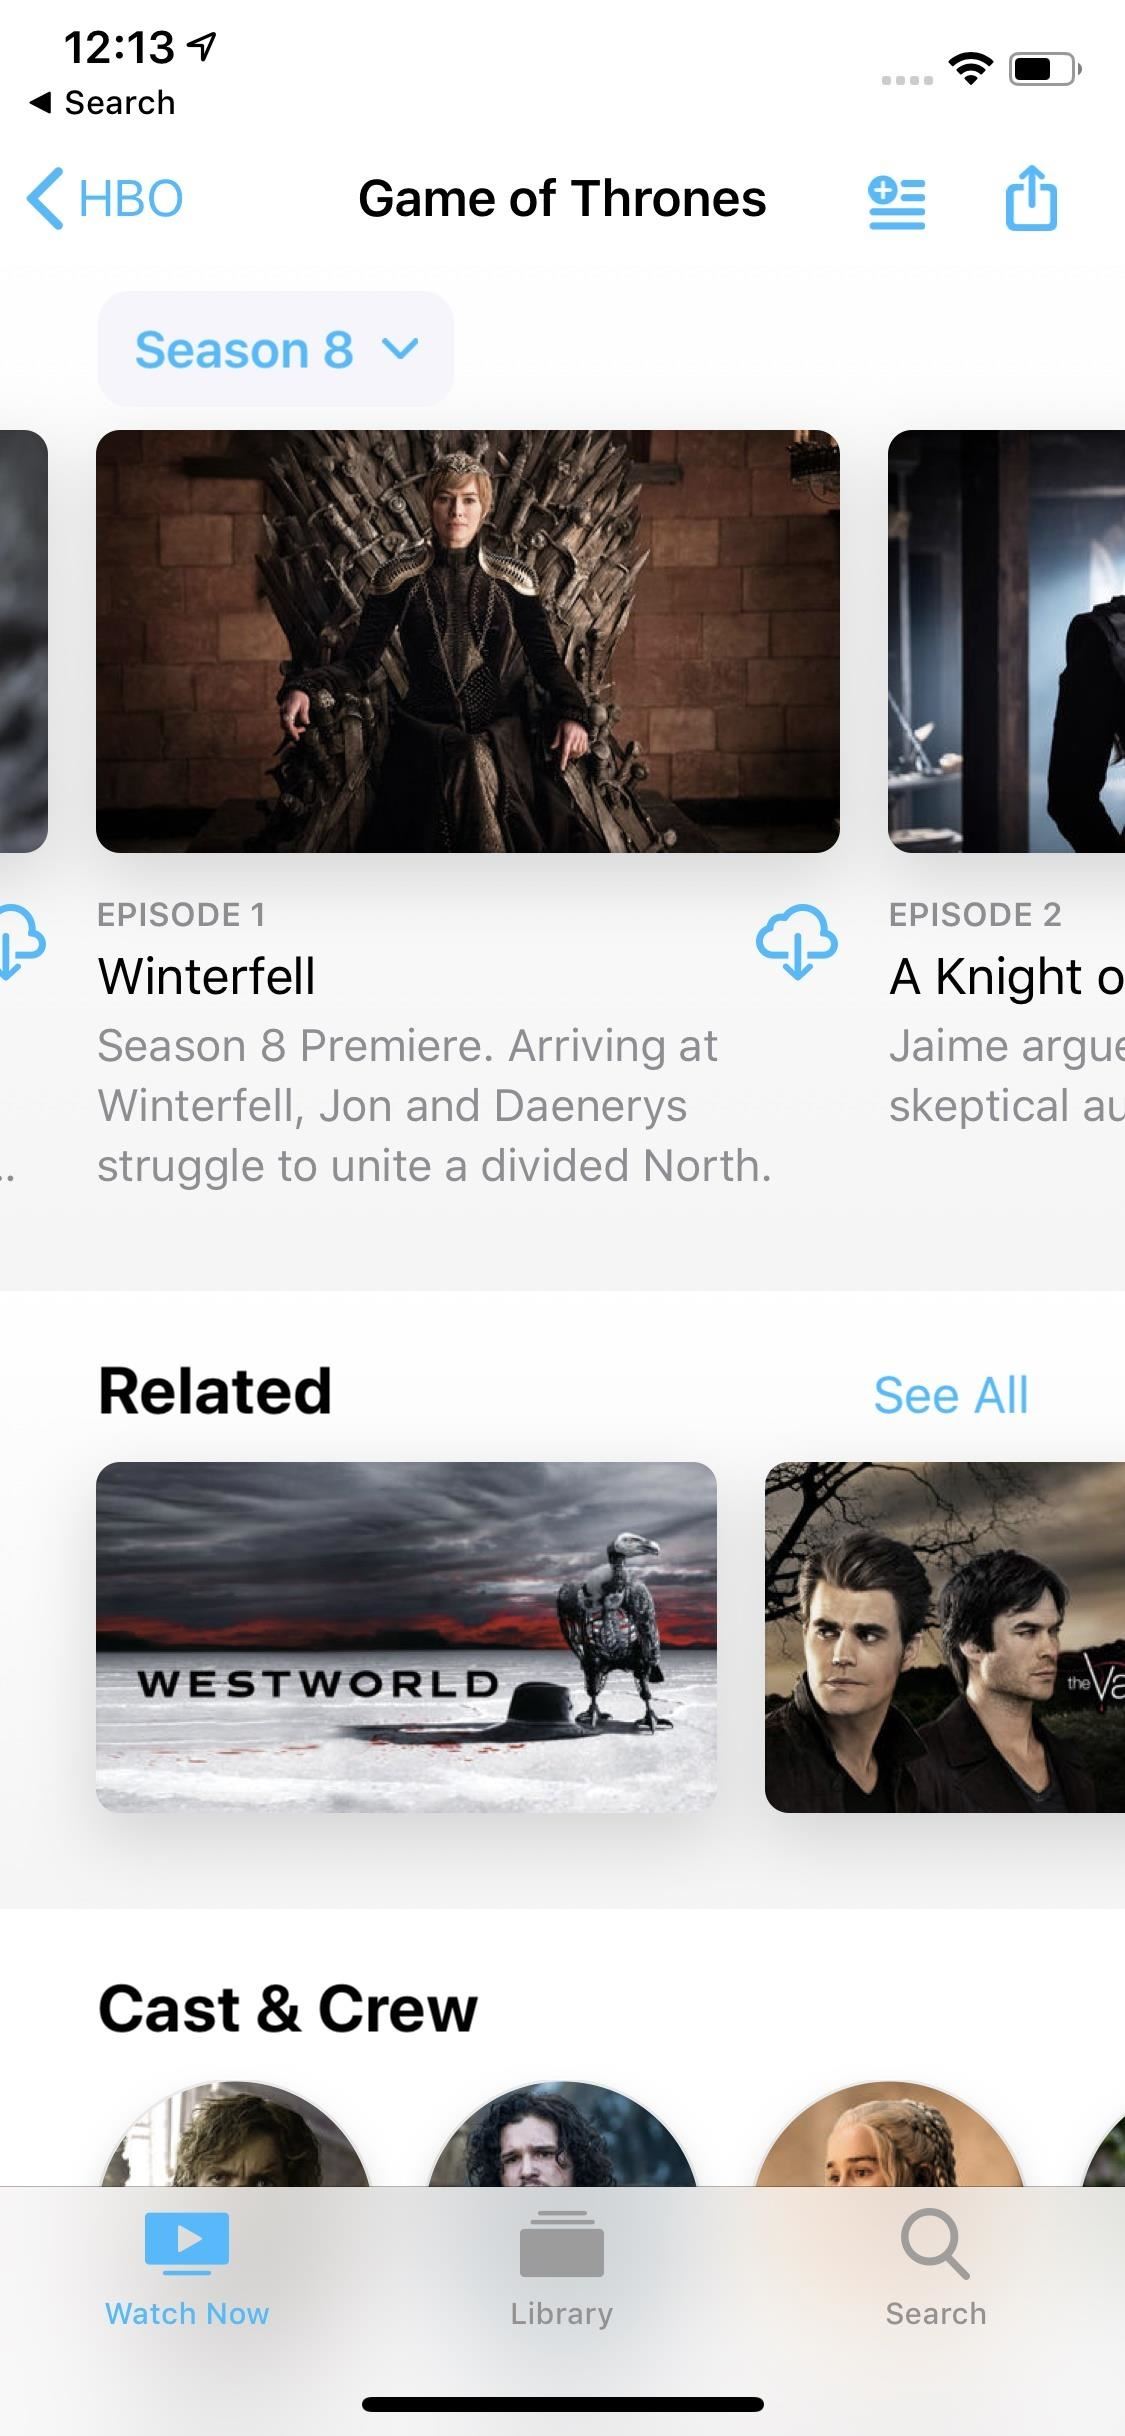 How to Watch HBO Offline on Your iPhone for 'Game of Thrones' Anytime